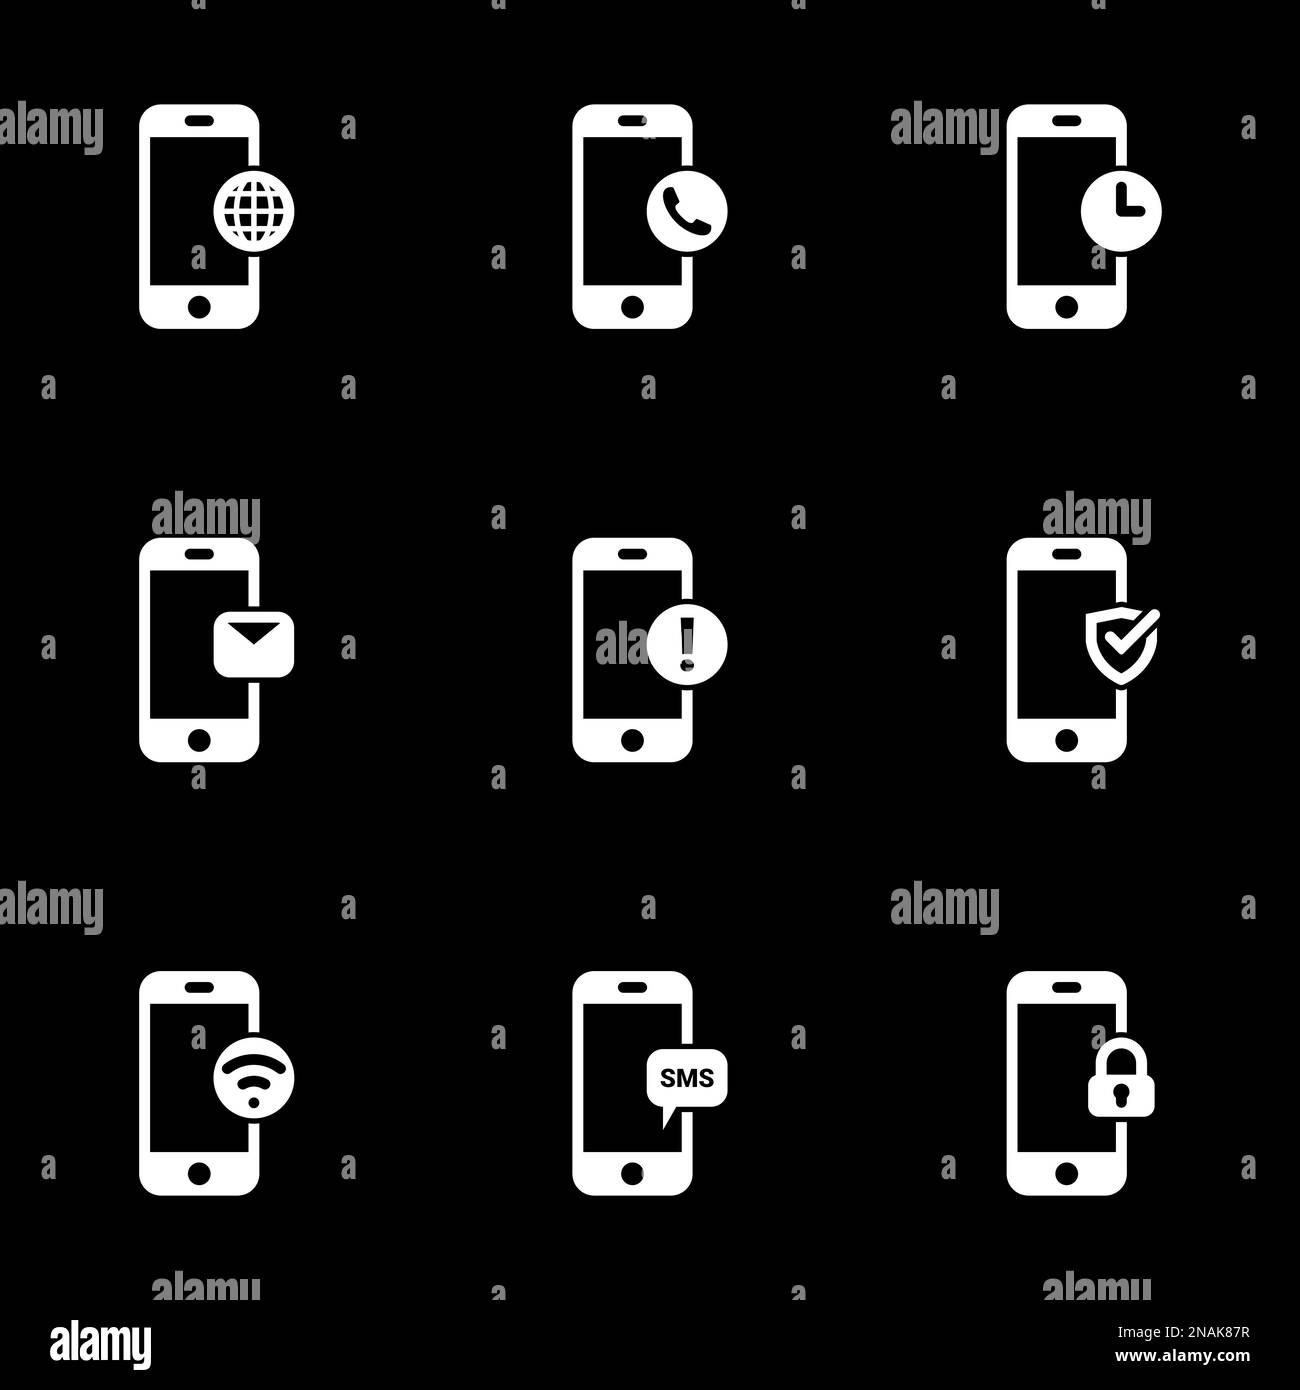 Set of simple icons on a theme Phone functions, functionality, notification, communication, internet, message, vector, set. Black background Stock Vector